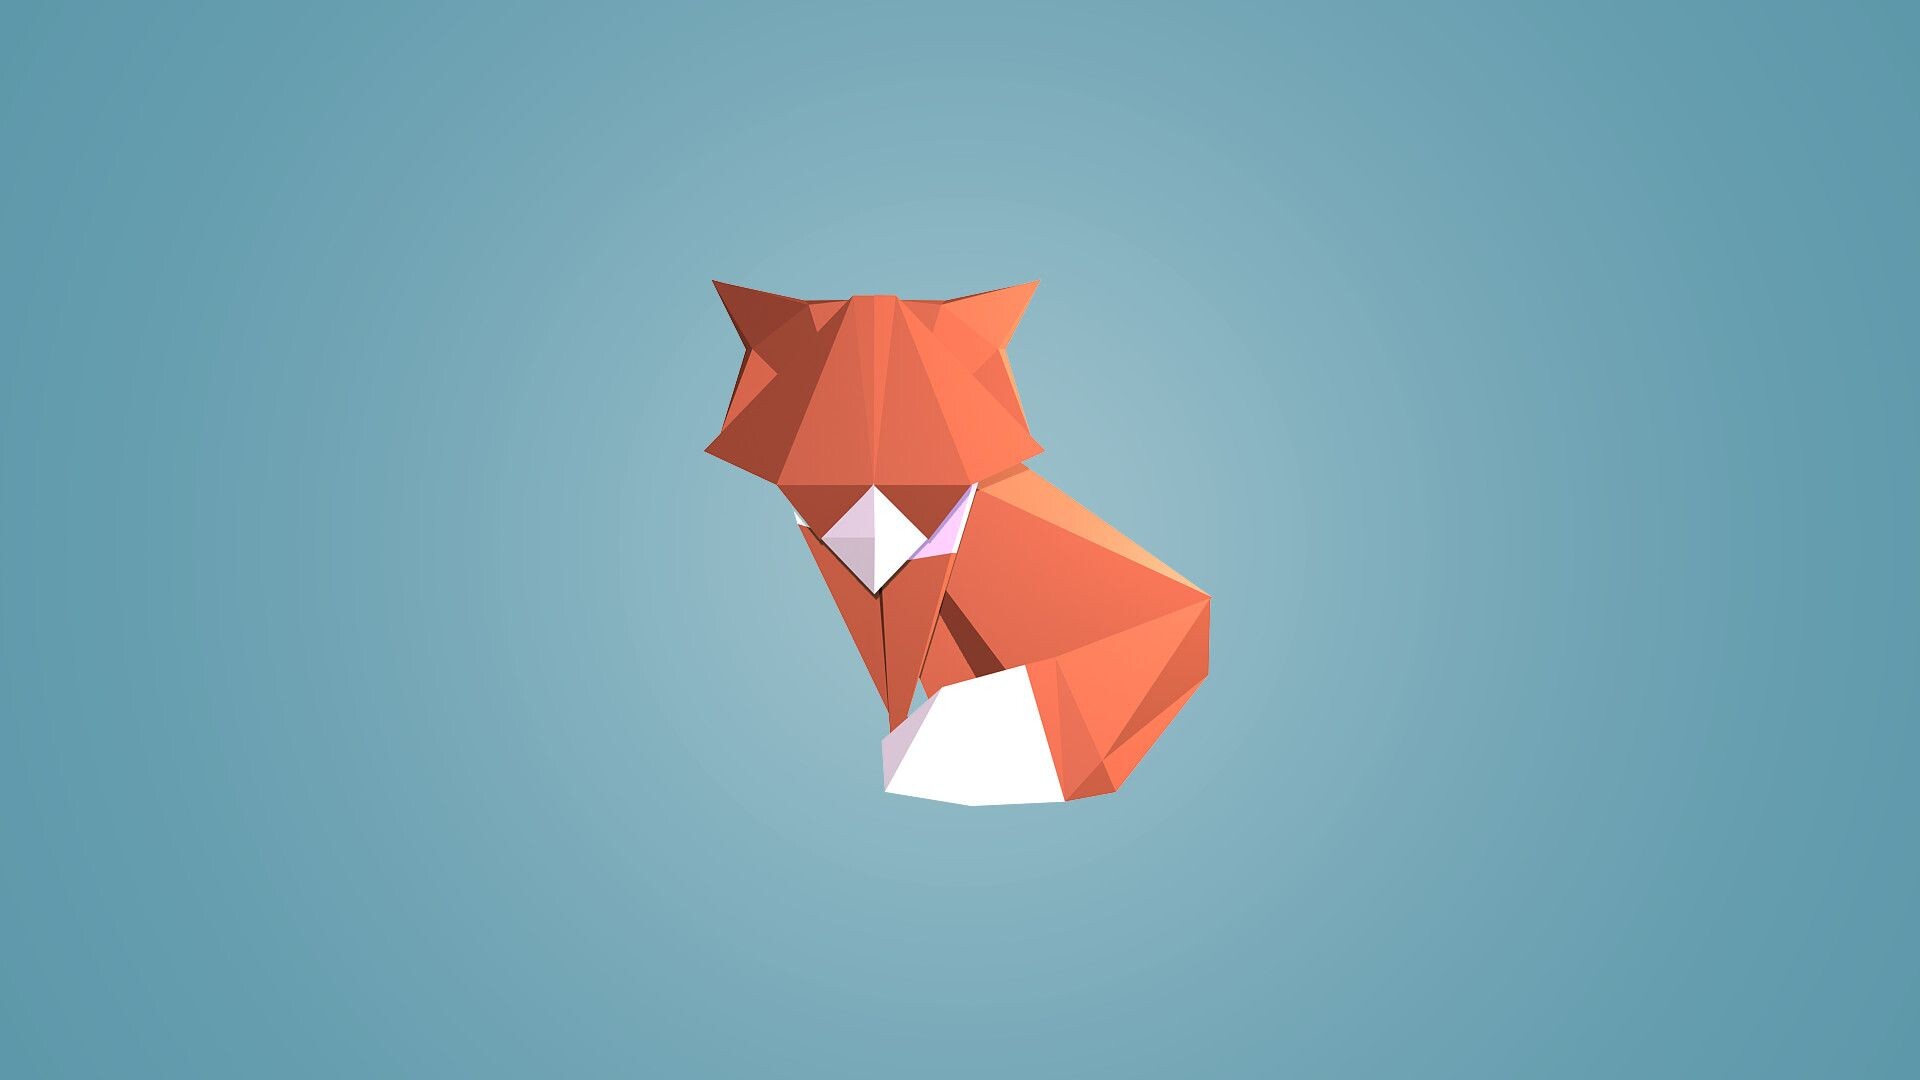 Geometric Animal, Fox in polygons, Creative and unique wallpapers, 1920x1080 Full HD Desktop